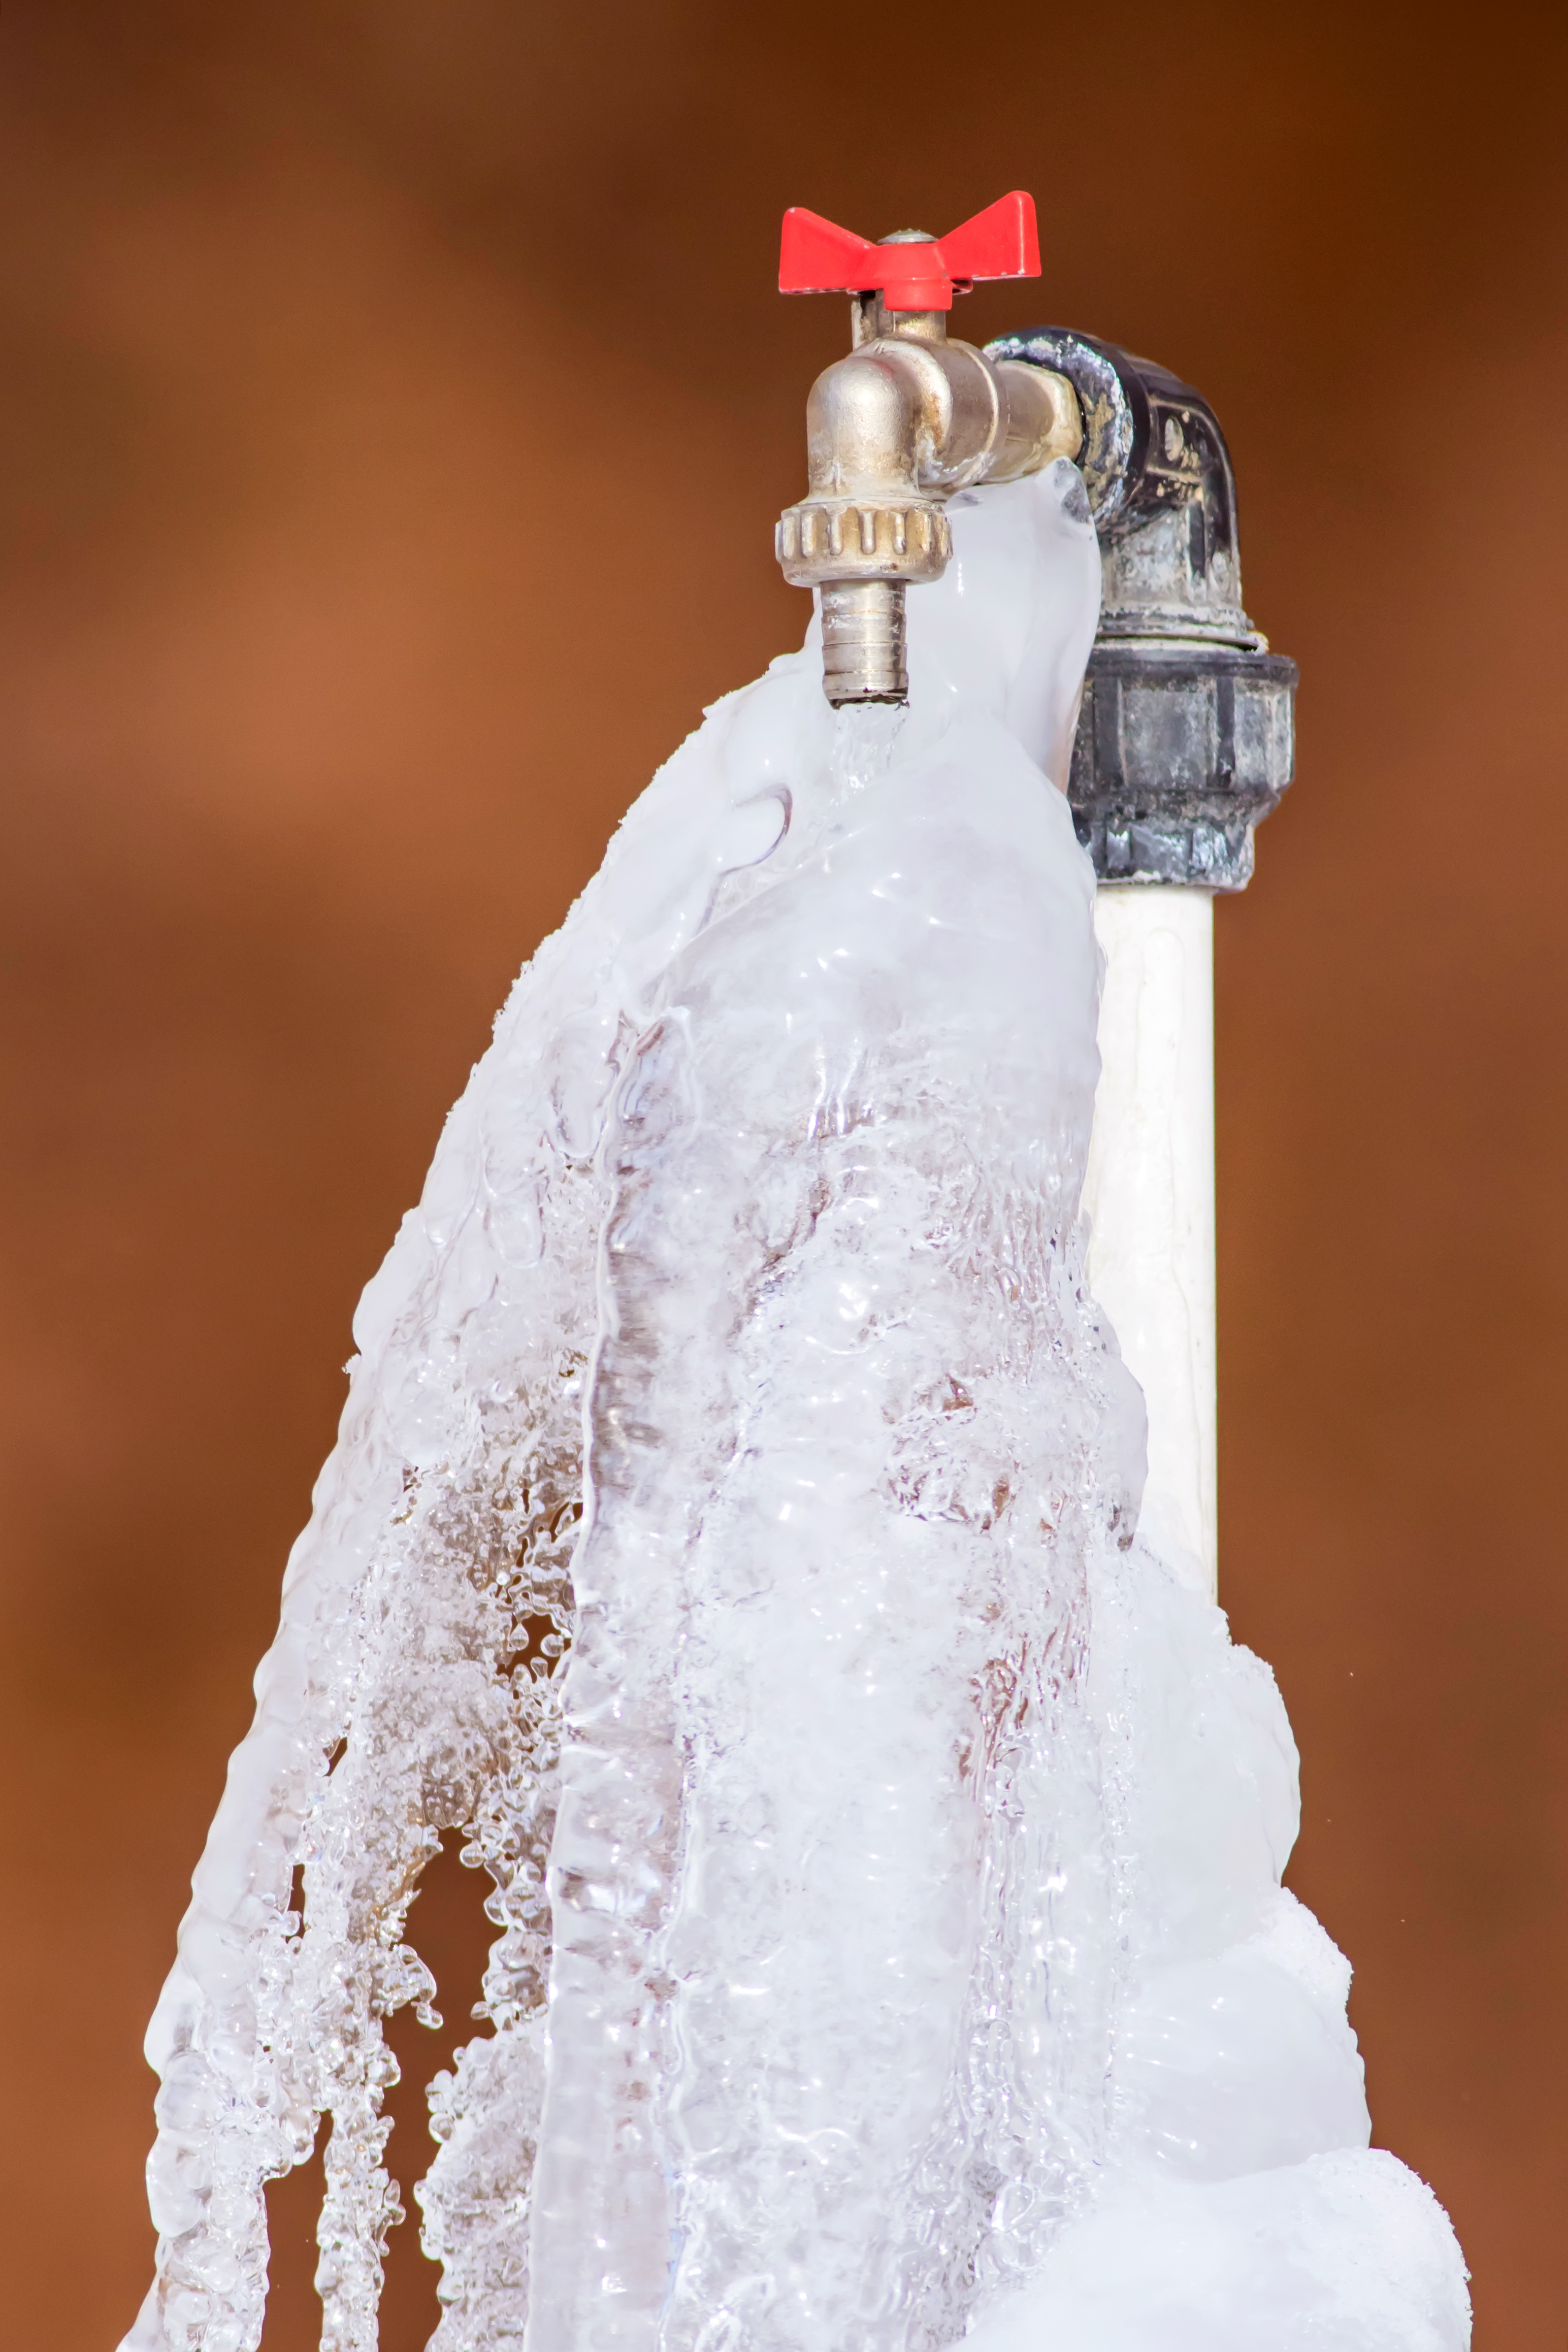 Winterize Your Plumbing in Niles, OH